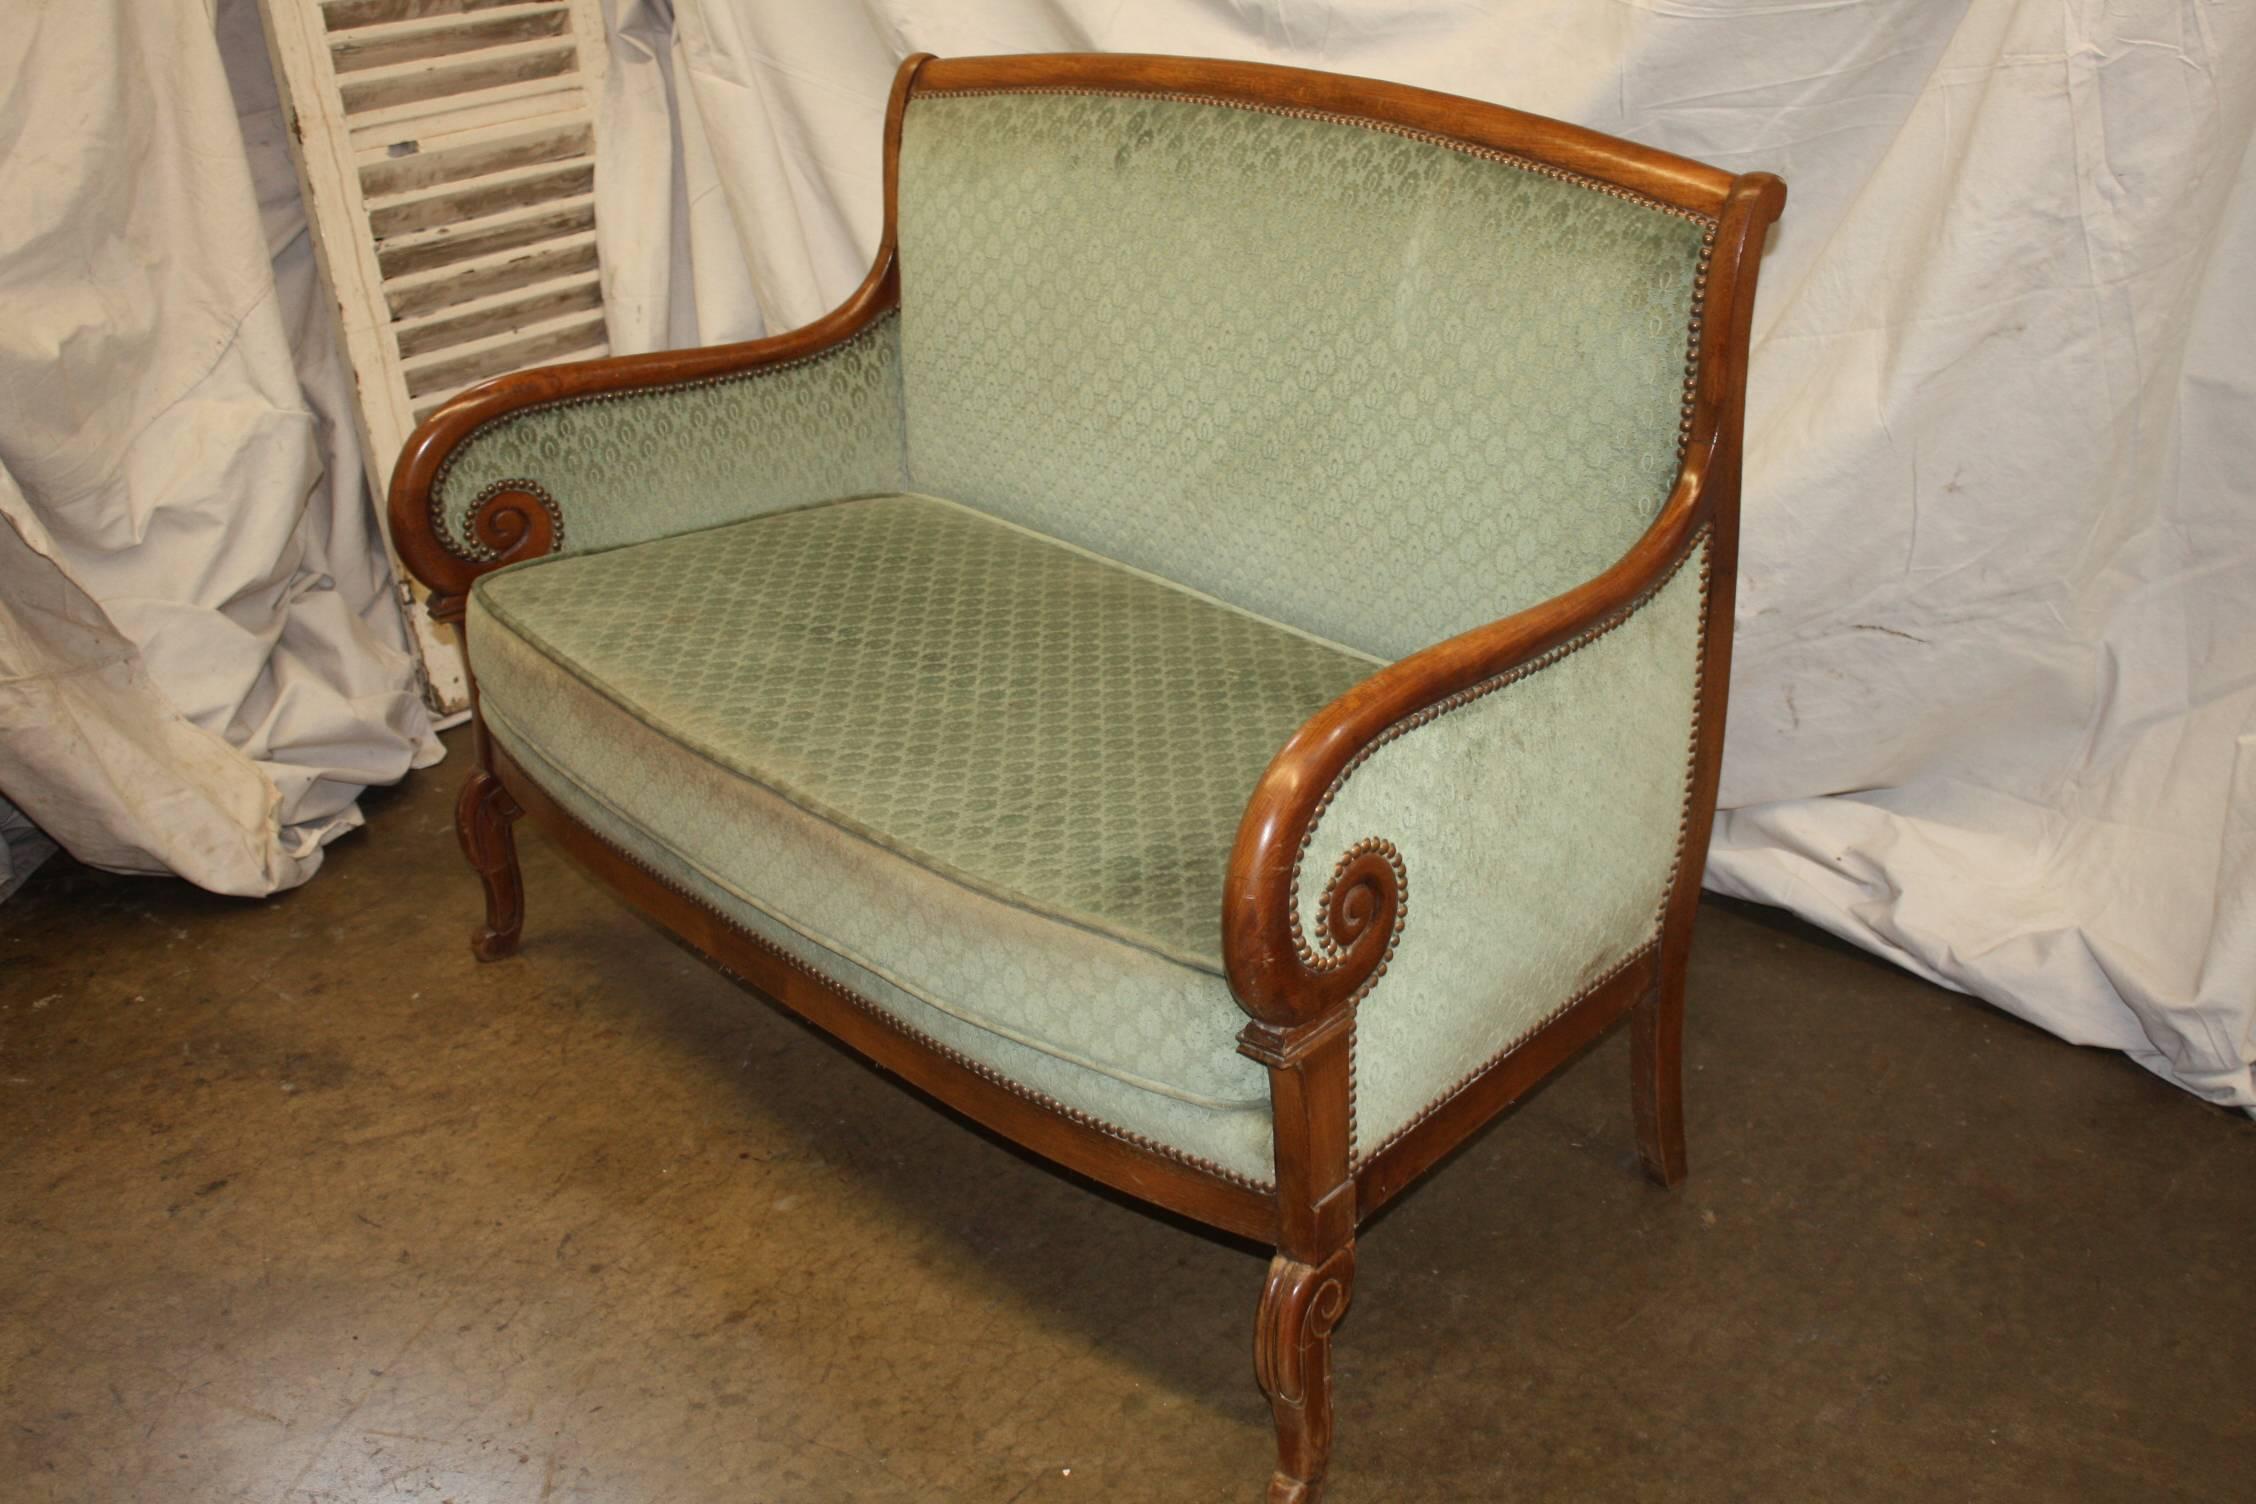 Restauration French settee.